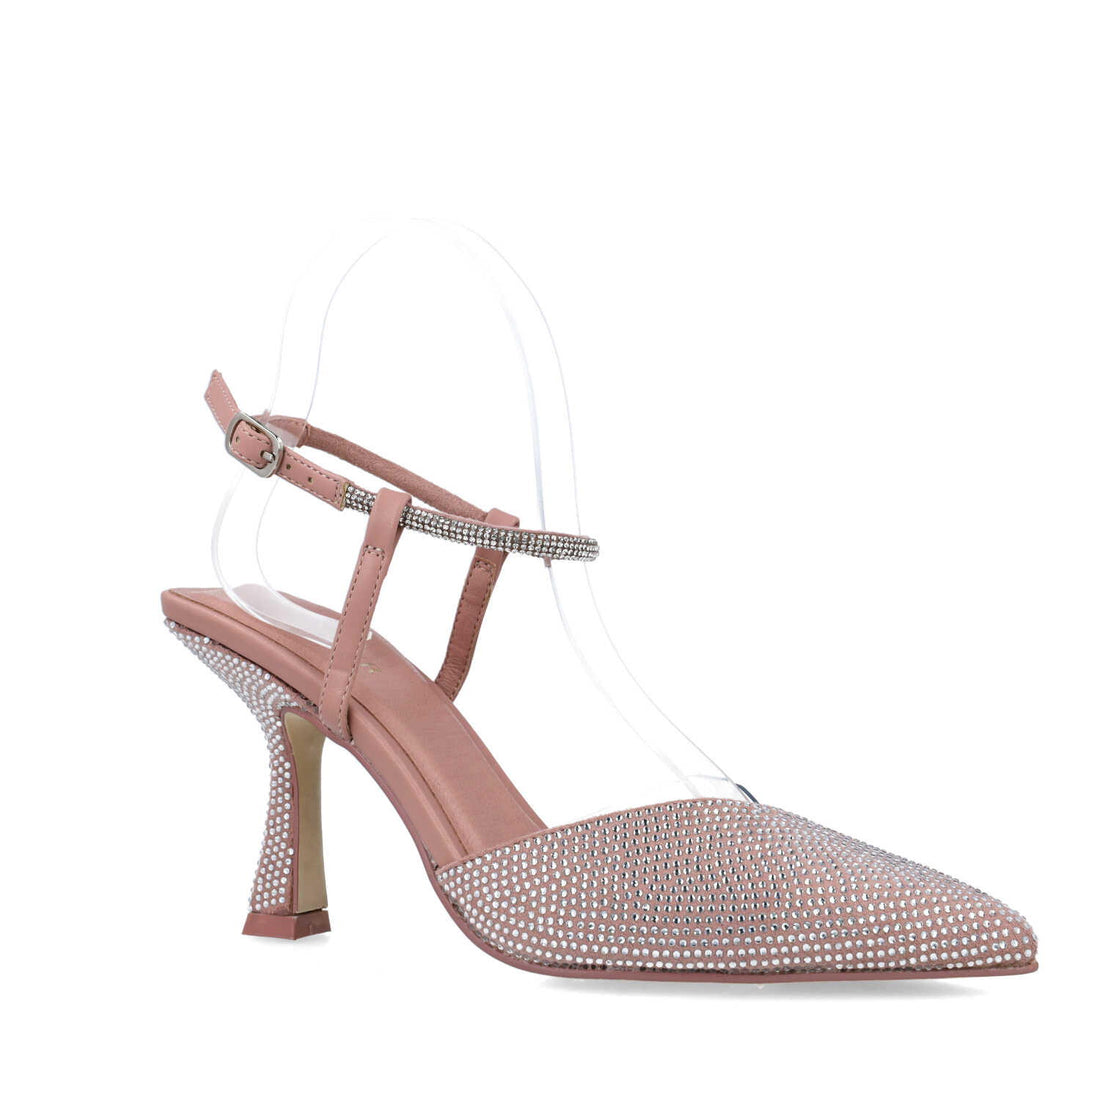 Nude Pumps With Ankle Strap_24738_97_02